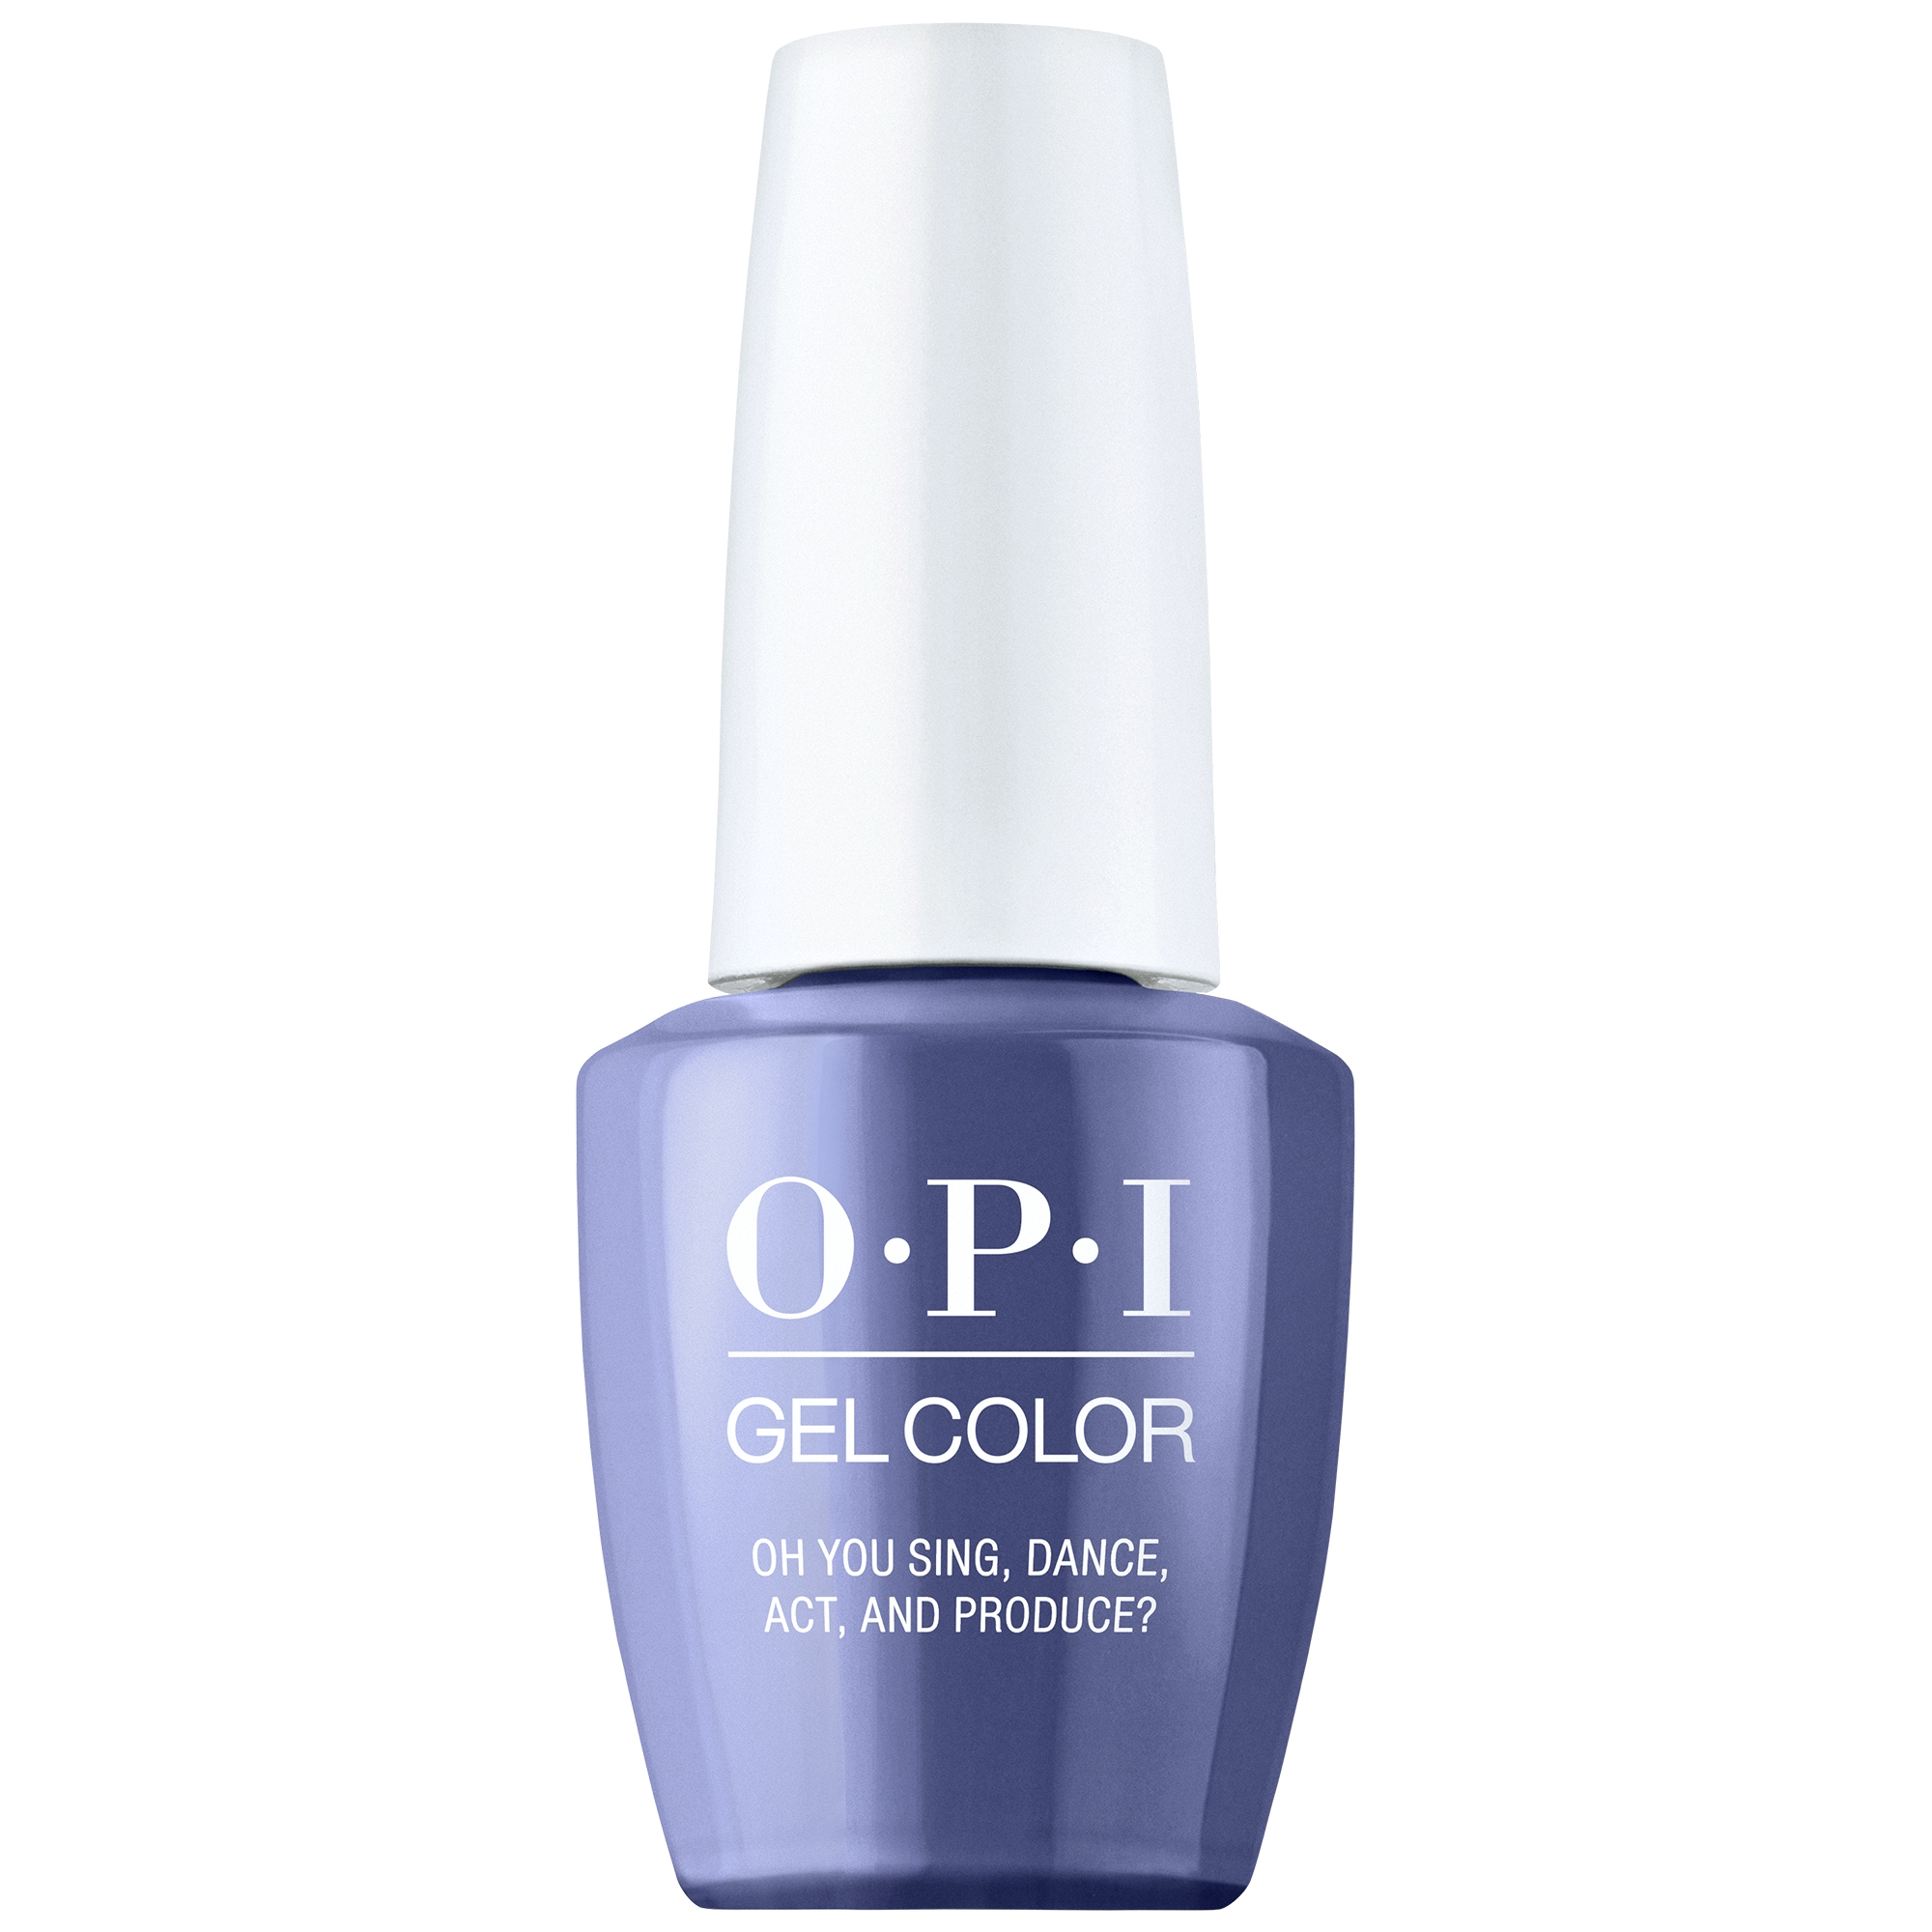 OPI Gel Color 360 - Oh You Sing, Dance, Act and Produce?